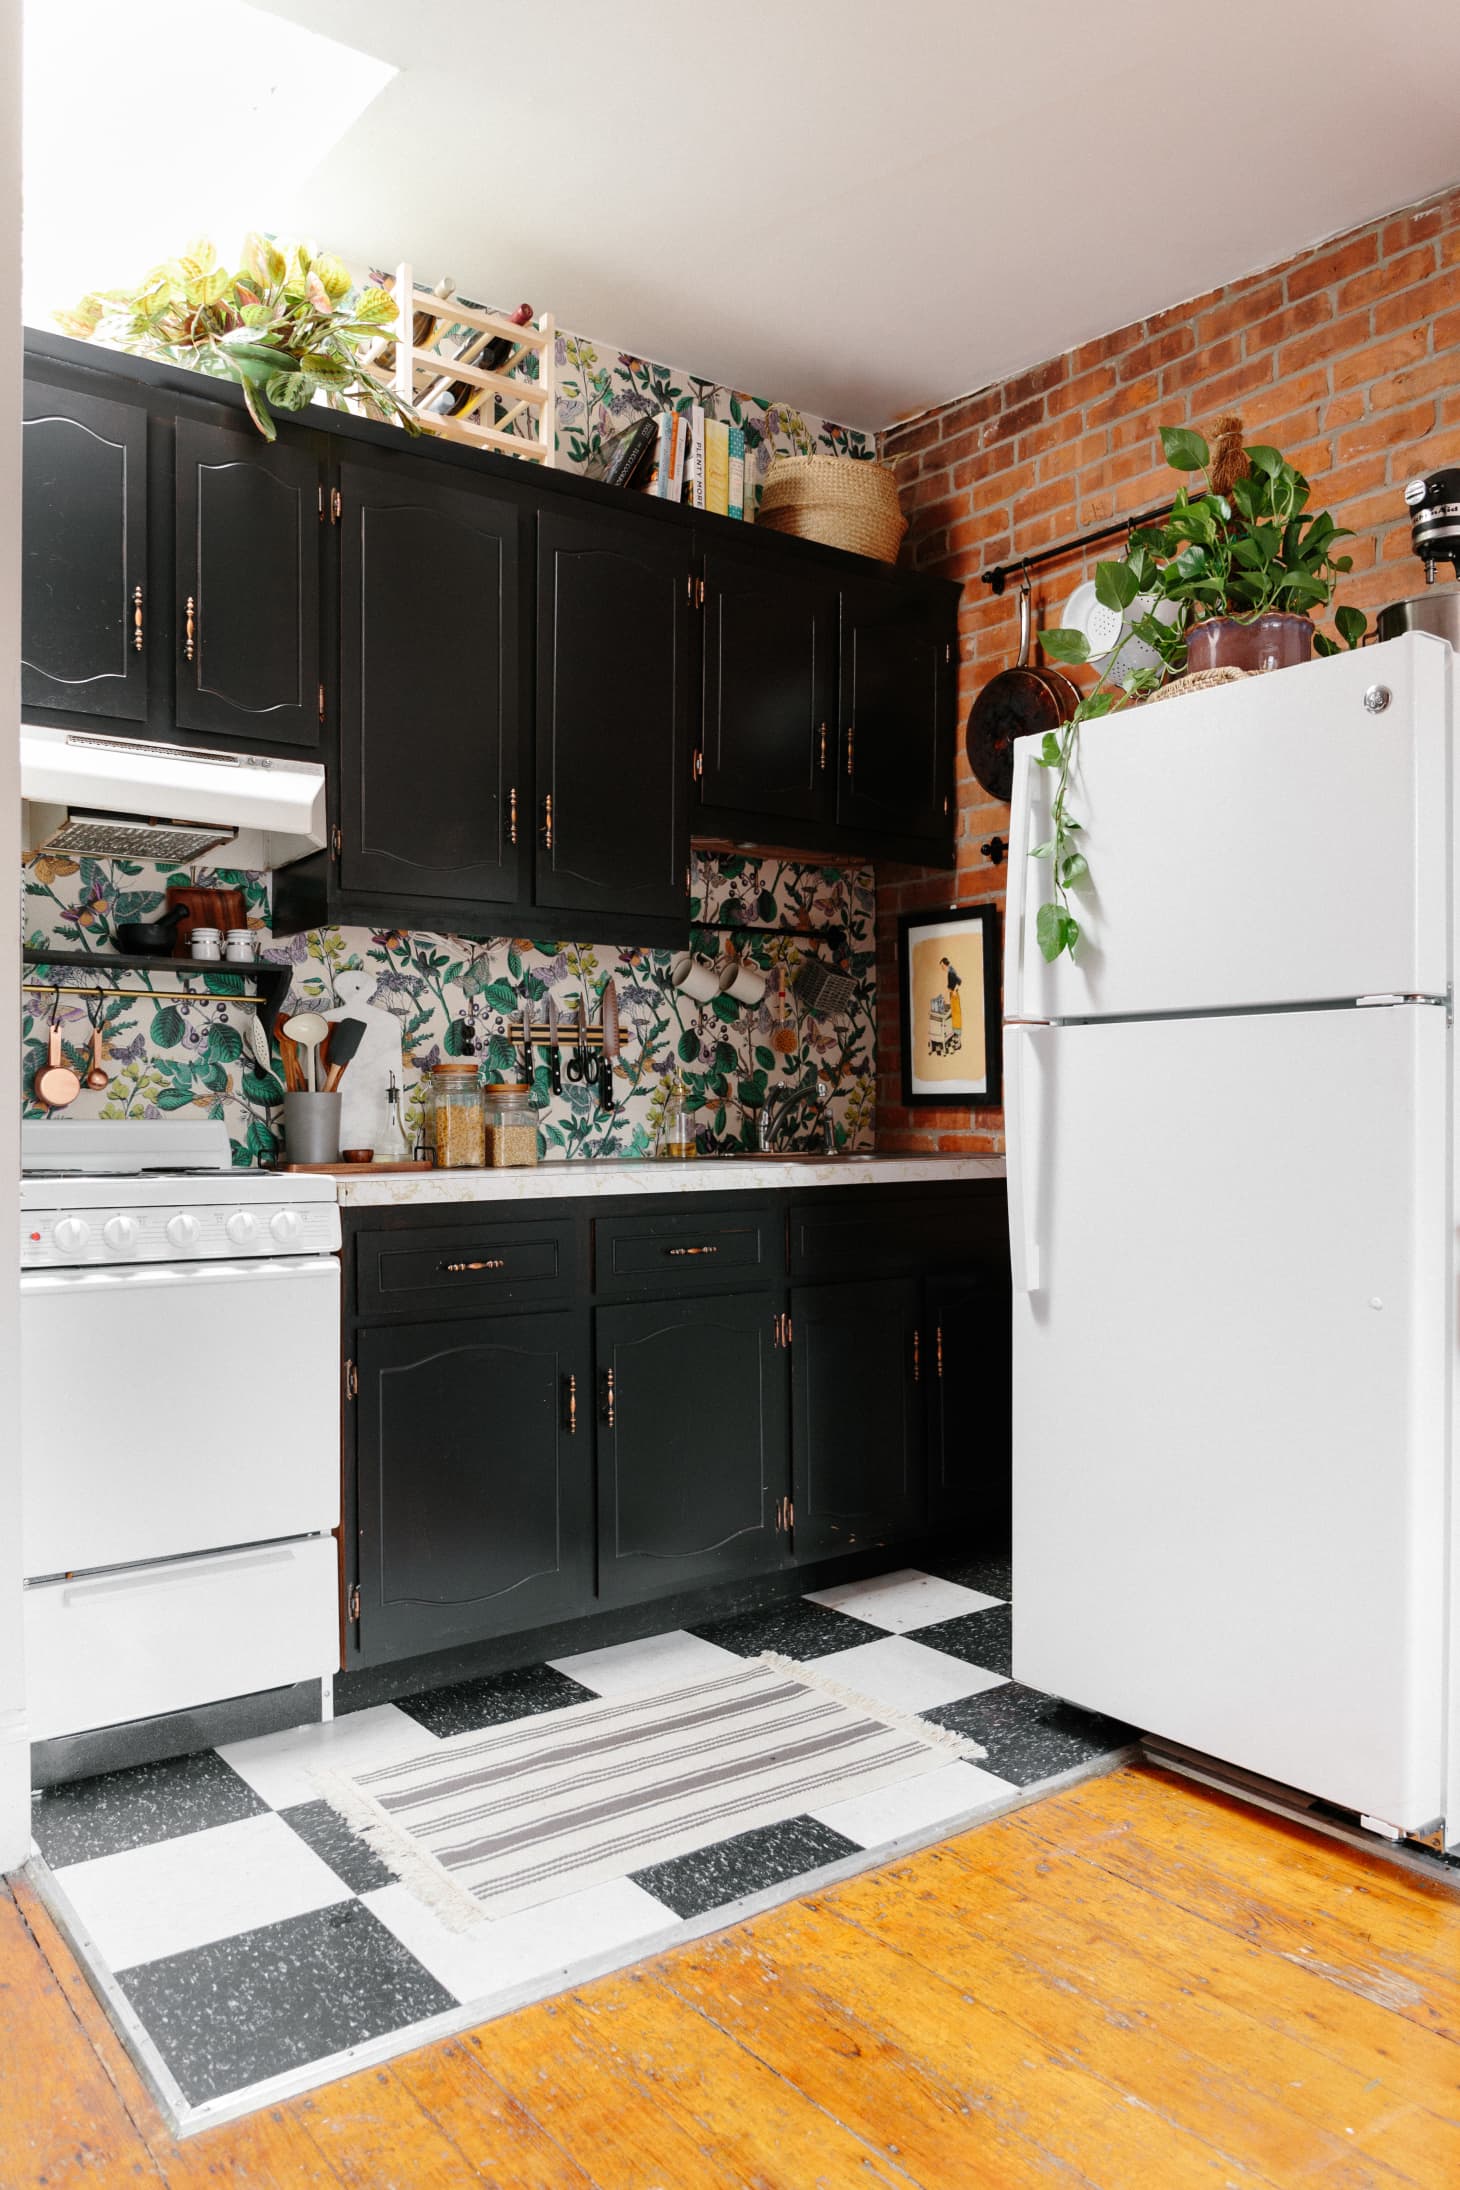  300 Later This Rental Kitchen  Is No Longer Recognizable 